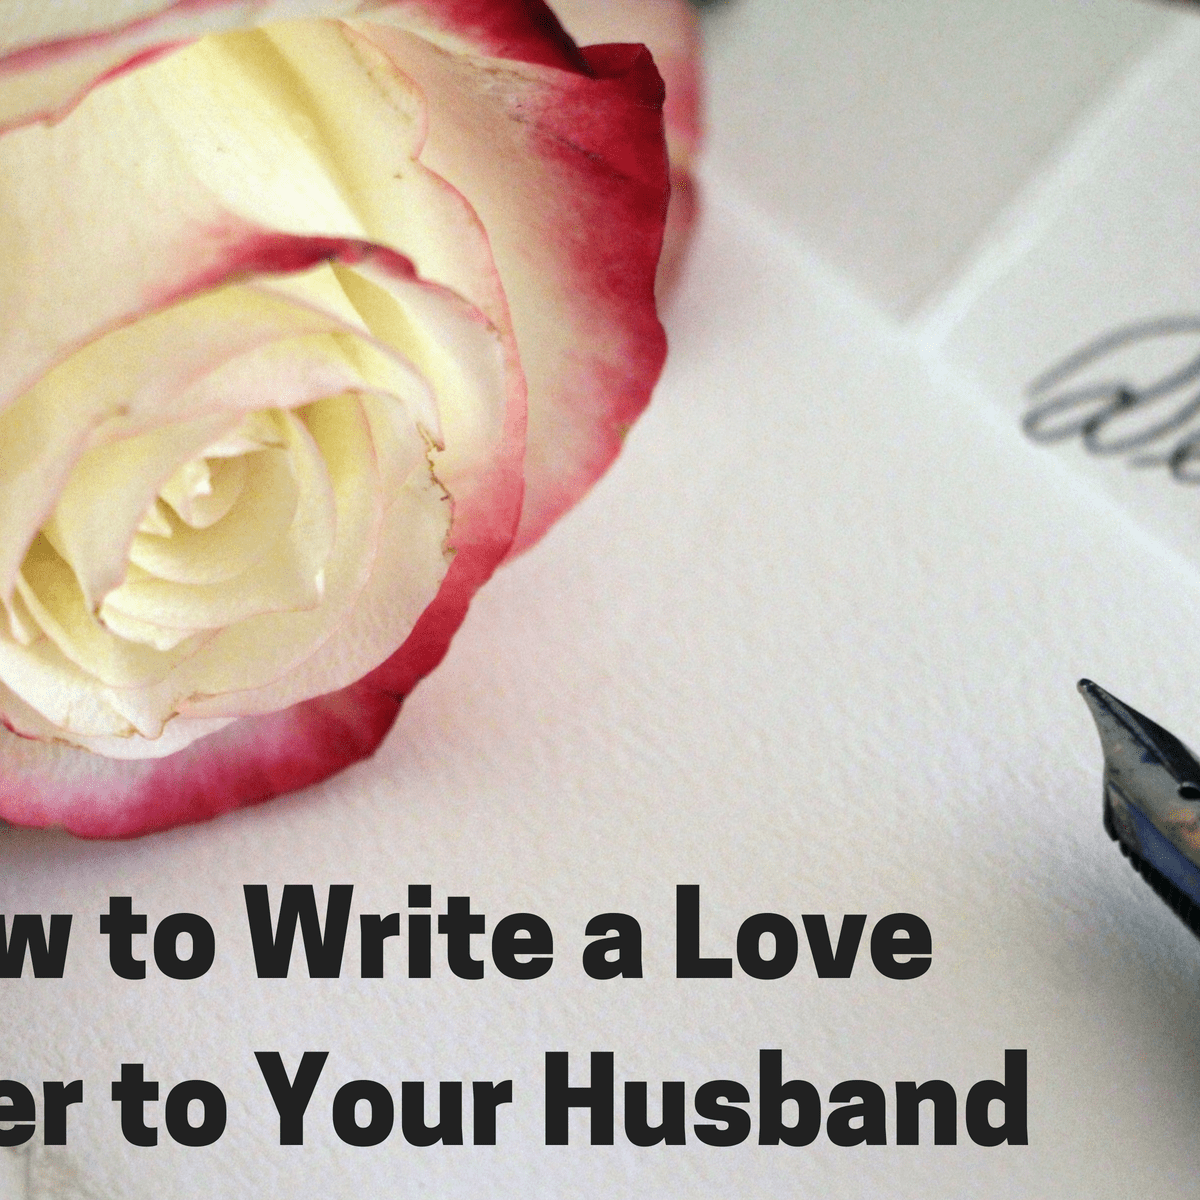 25 Sample Love Letters to Your Husband or Boyfriend - PairedLife